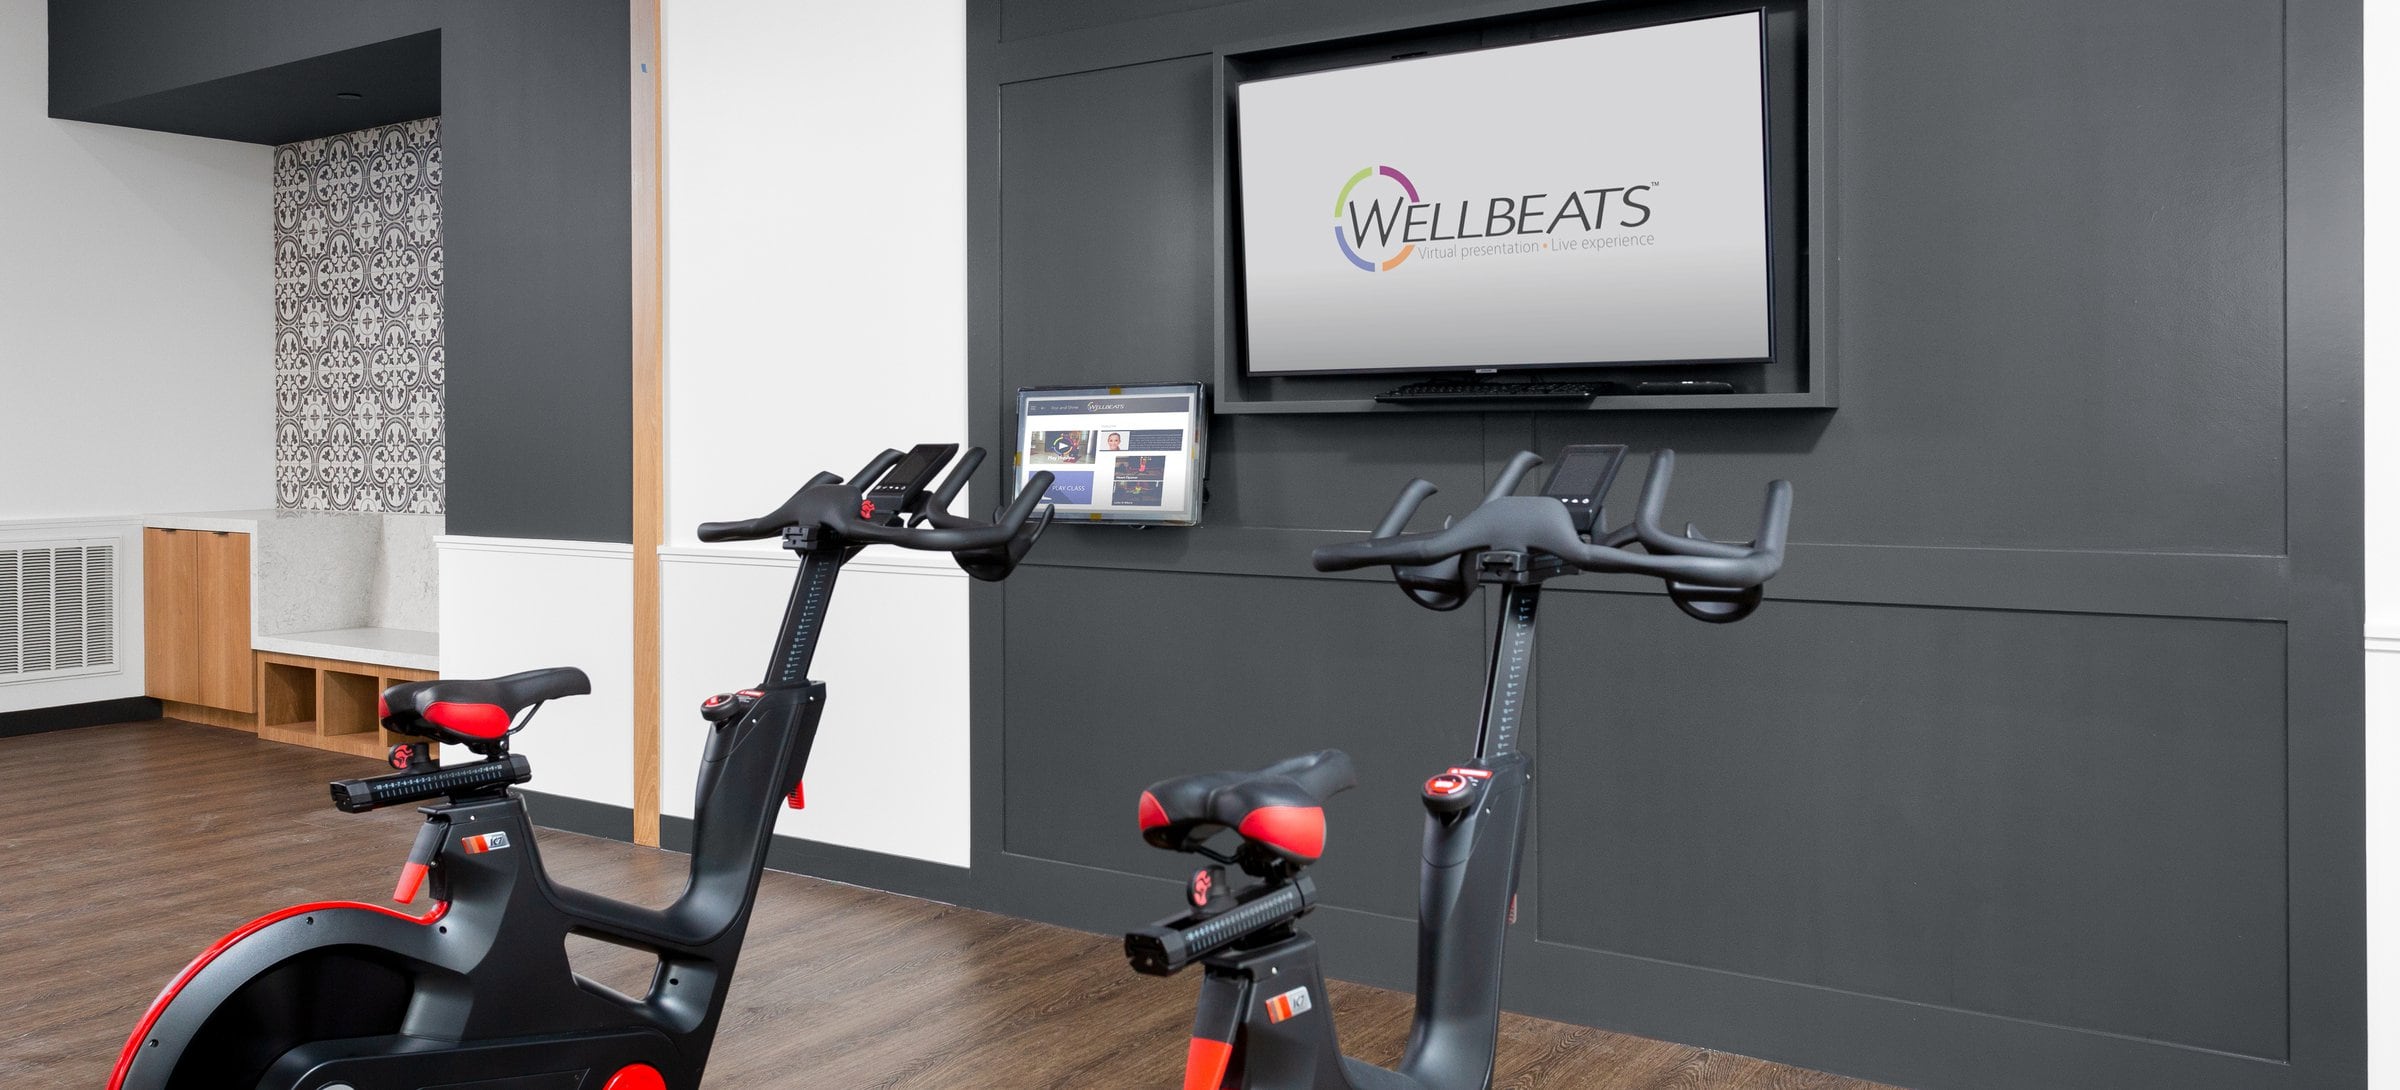 Fitness center with spin bikes and virtual fitness programming